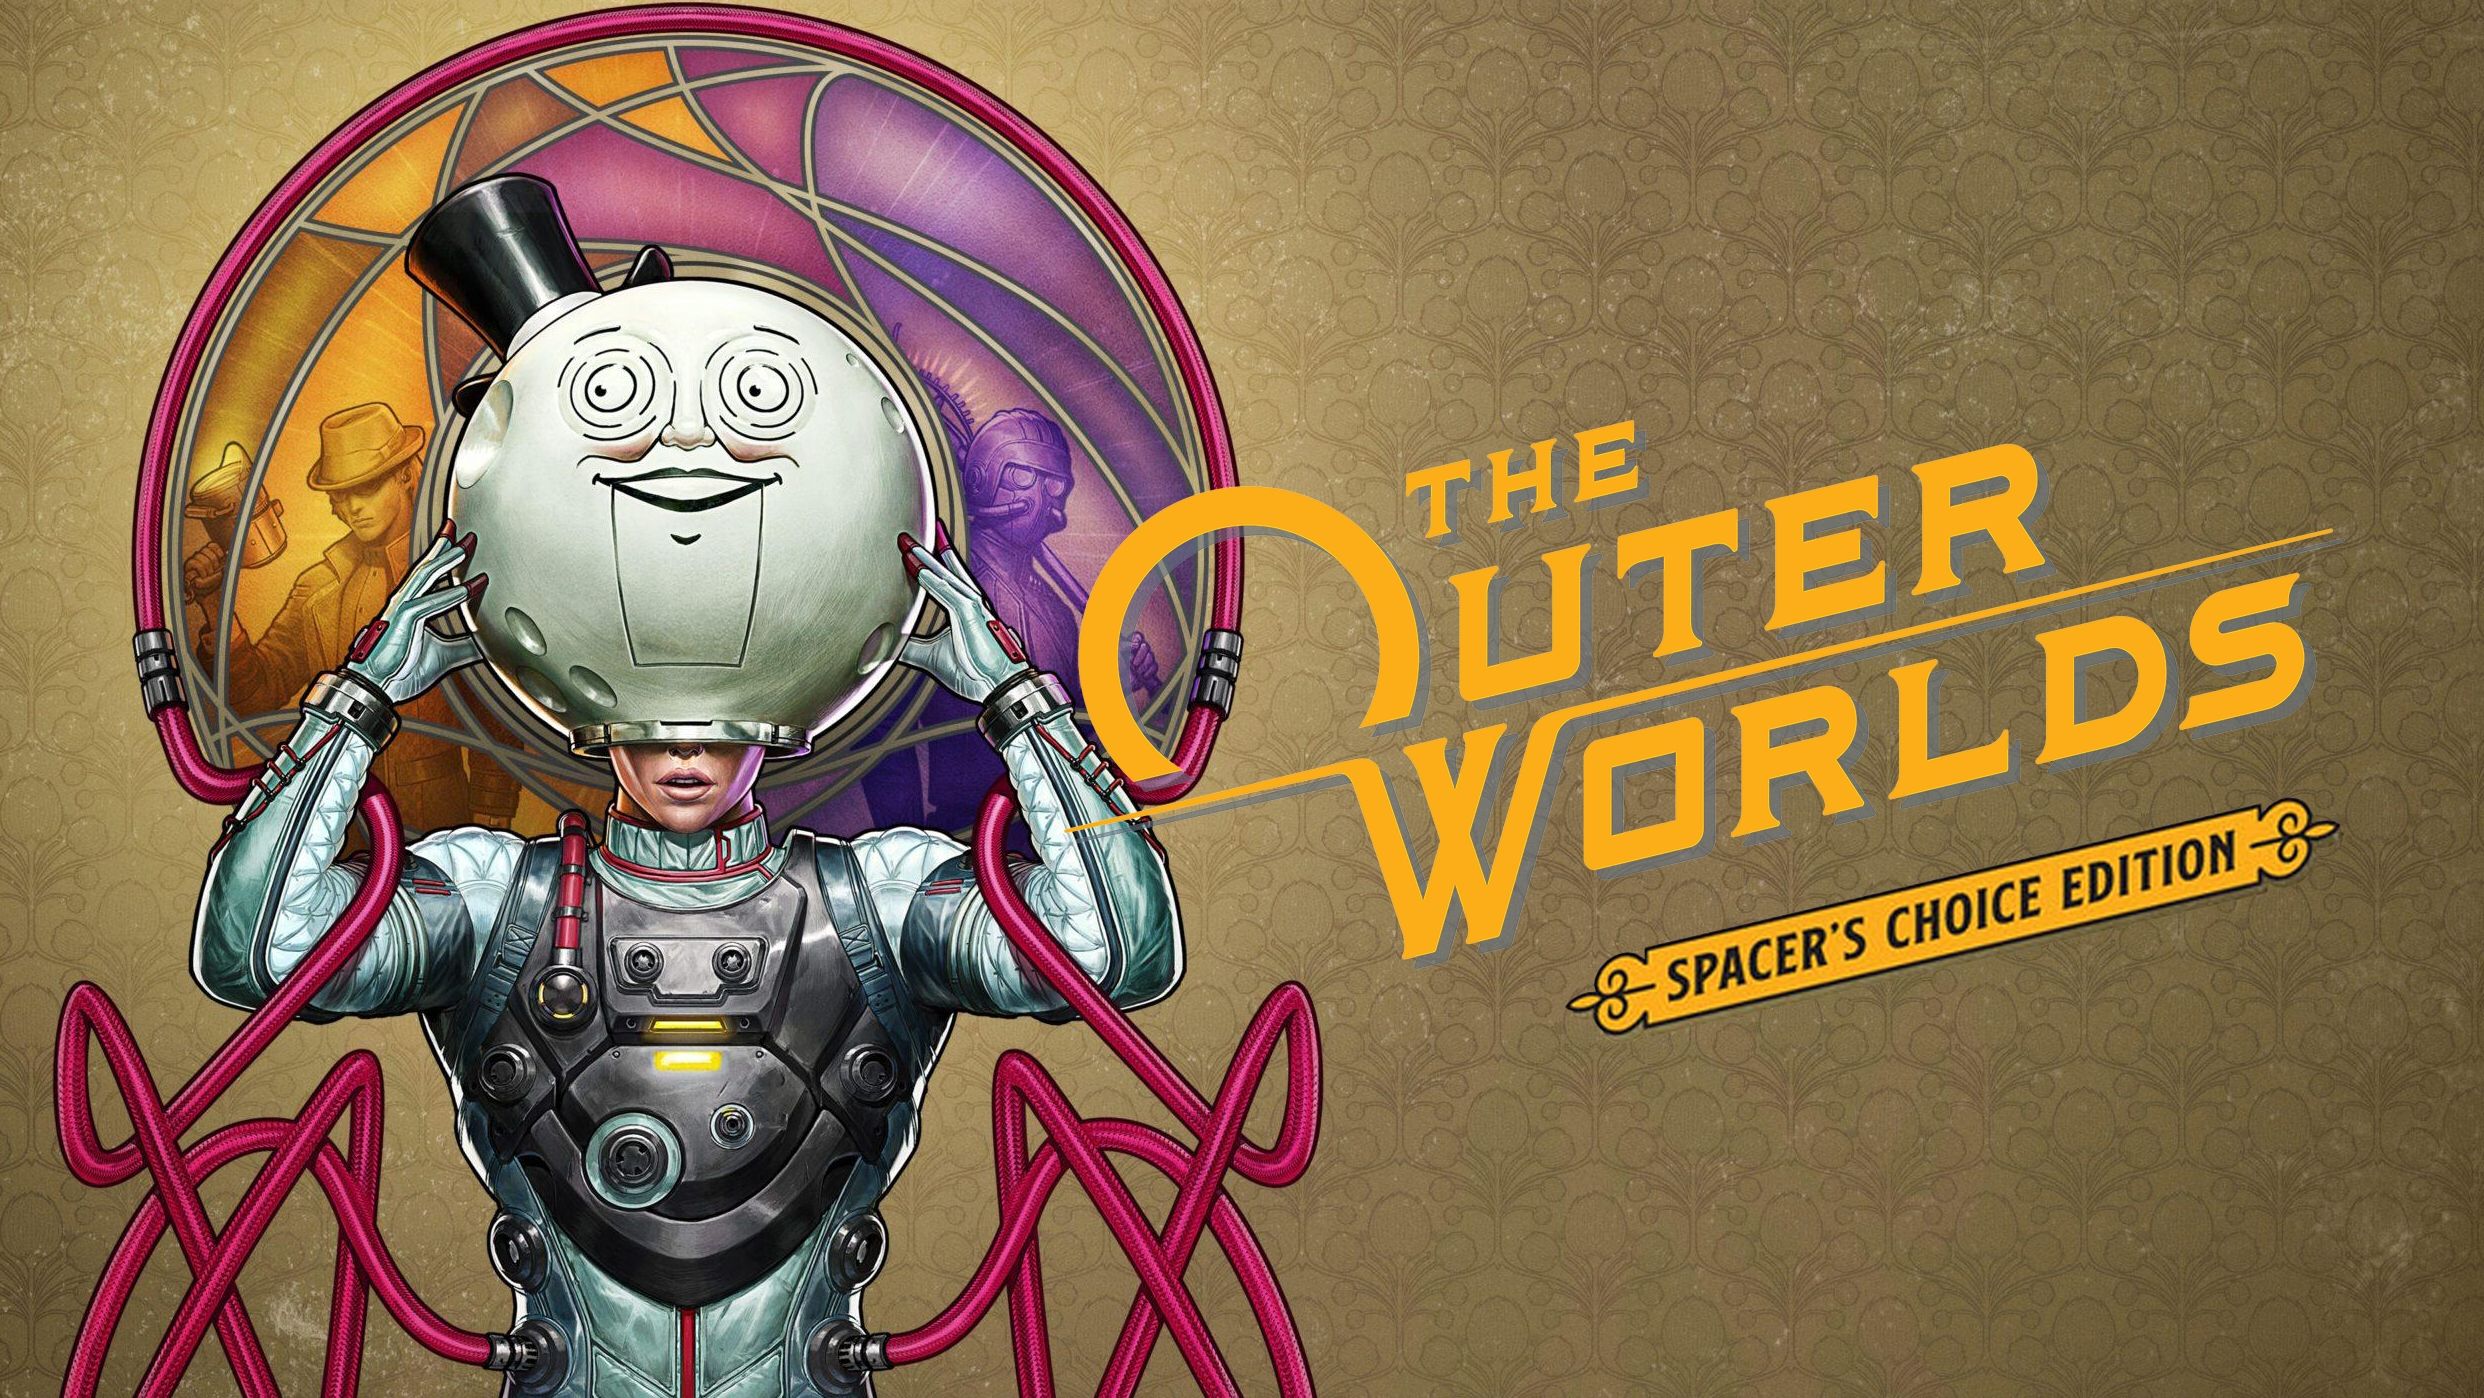 Day 6 of Free Games at Epic: The Outer Worlds Spacer's Choice Edition